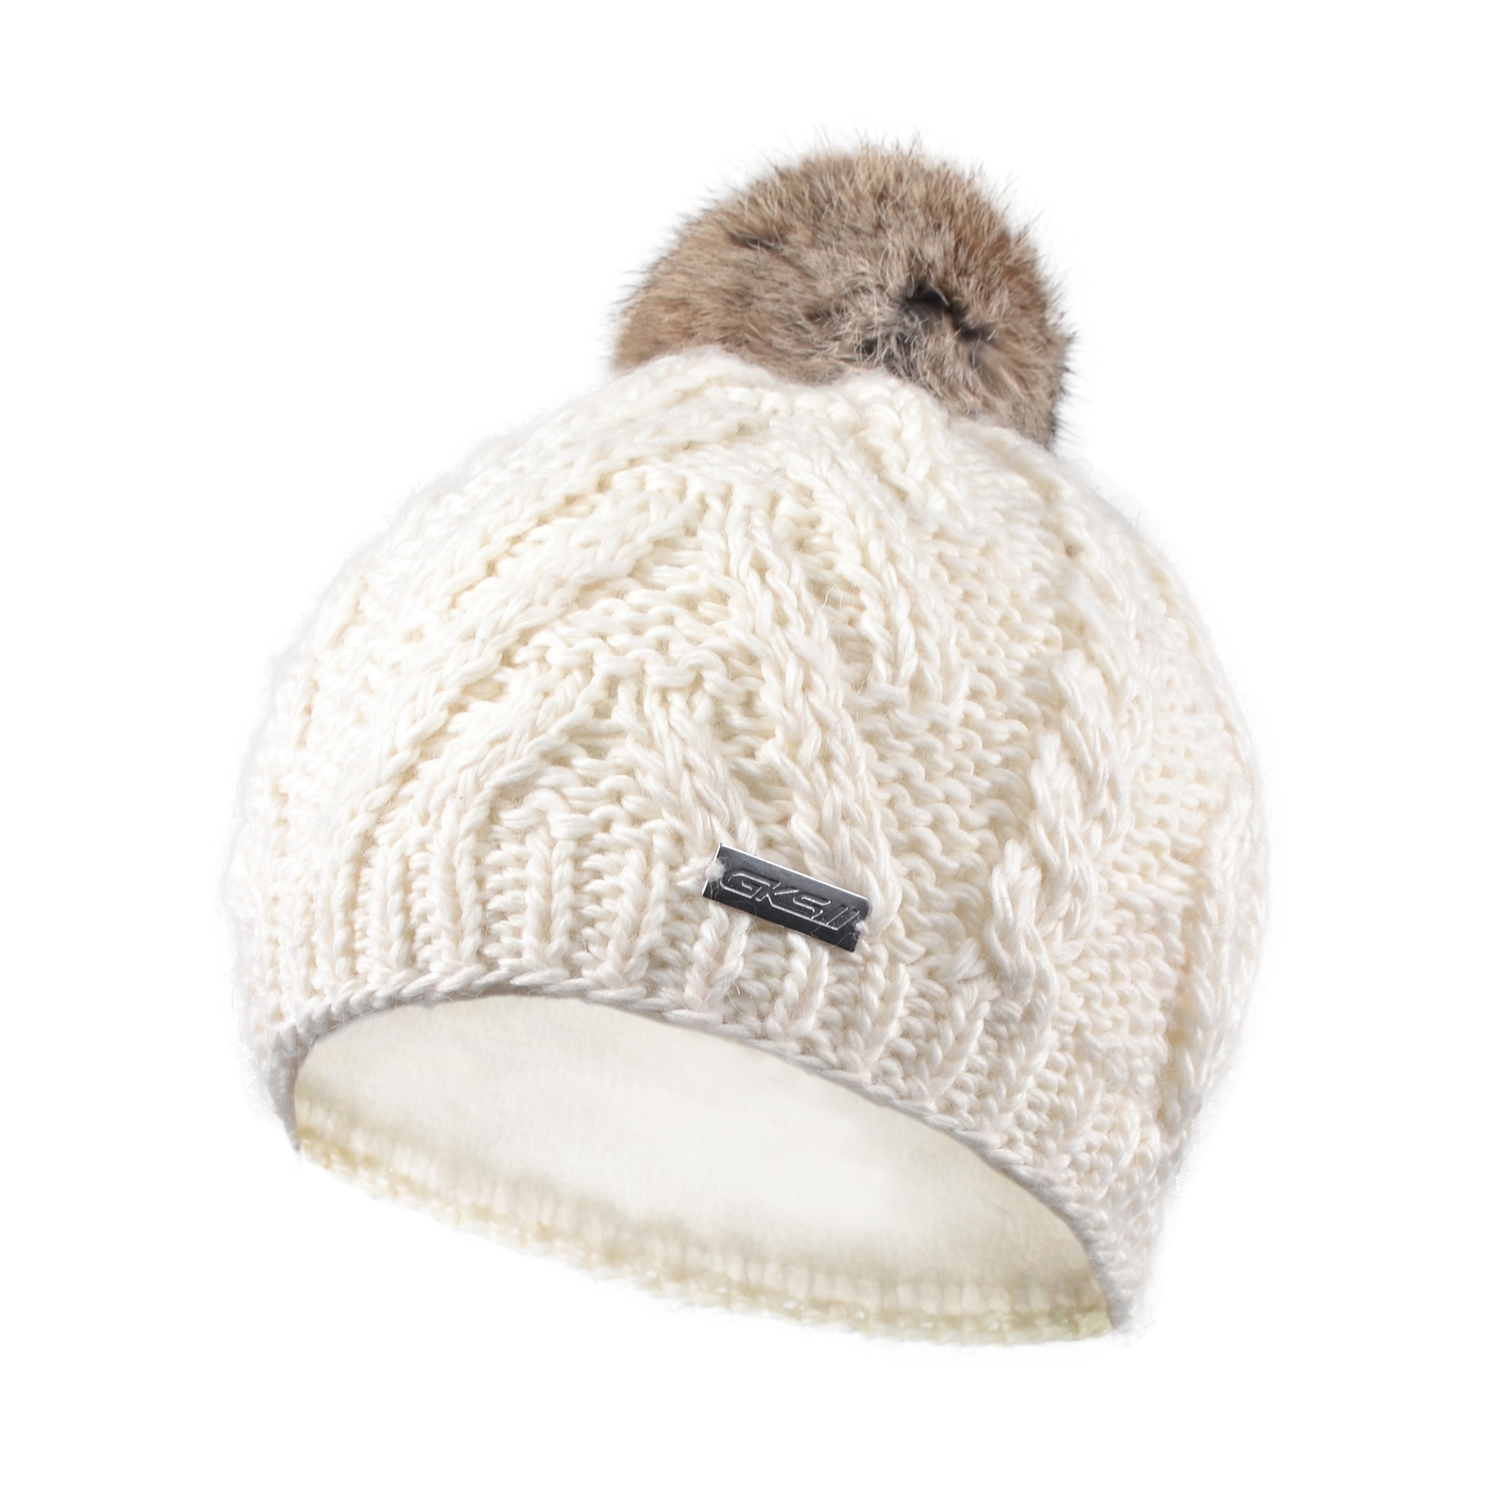 Tuque-Tricot-Four.lapin